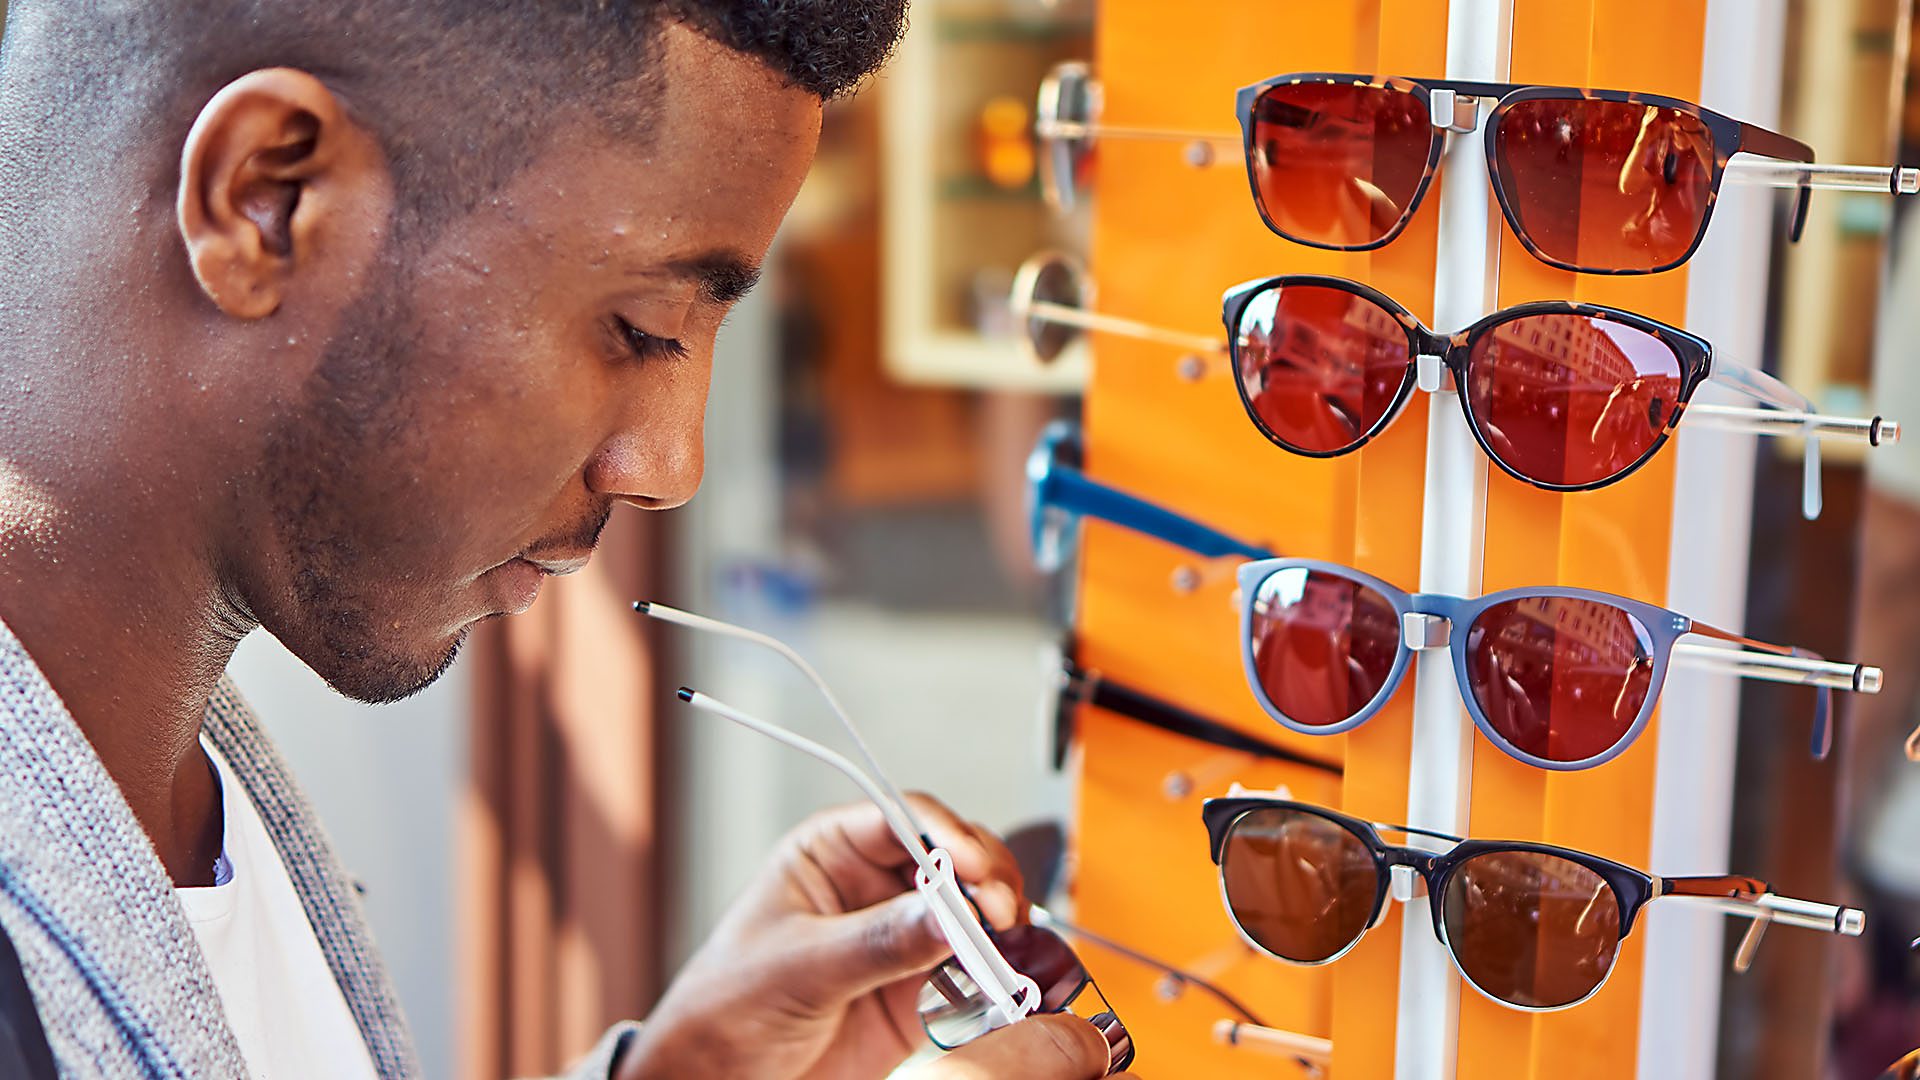 Where can you find cheap sunglasses? - Quora